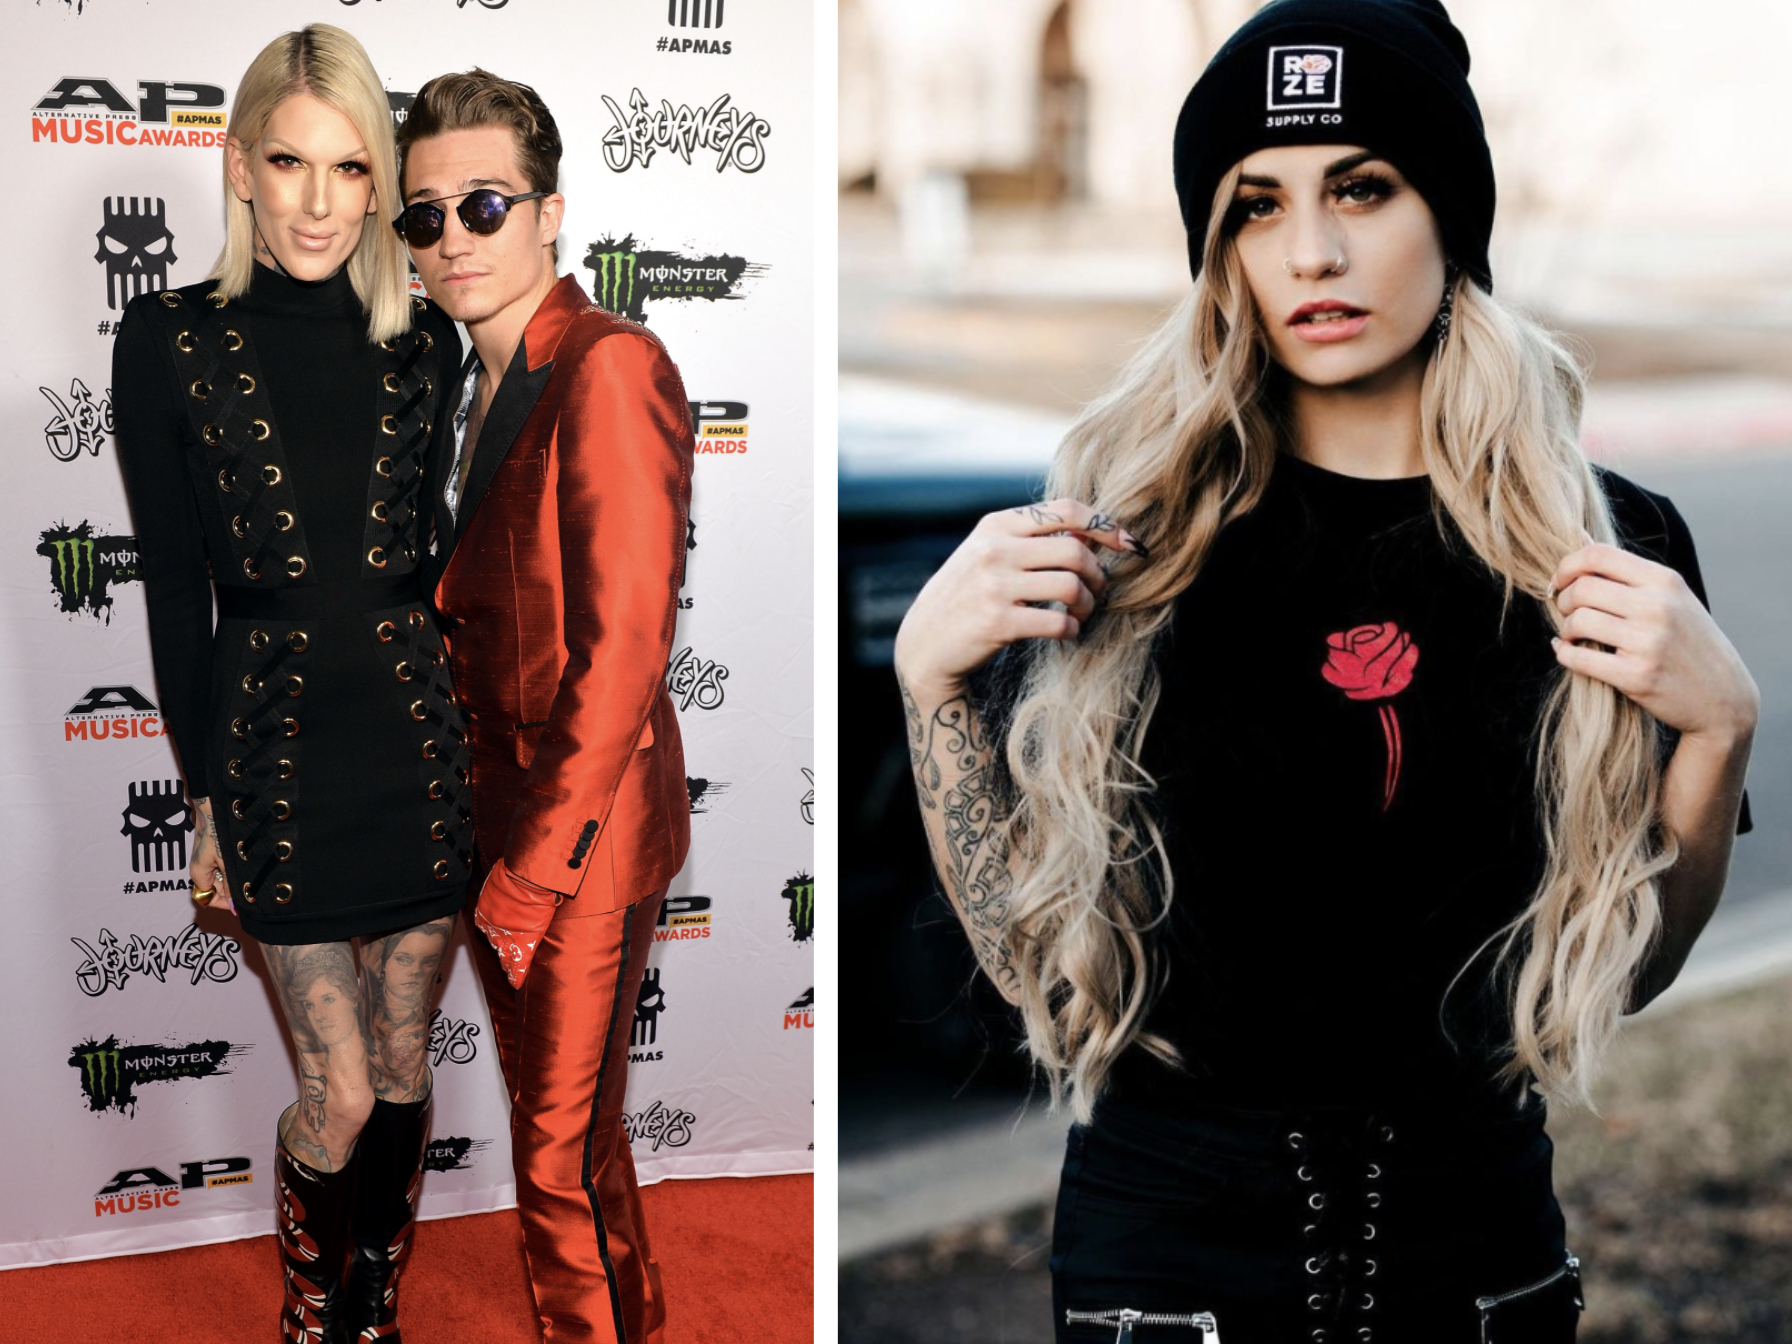 Nathan Schwandt was in a high-profile relationship with Jeffree Star for 5 years, and seems to have found love again with a Texas-based model.